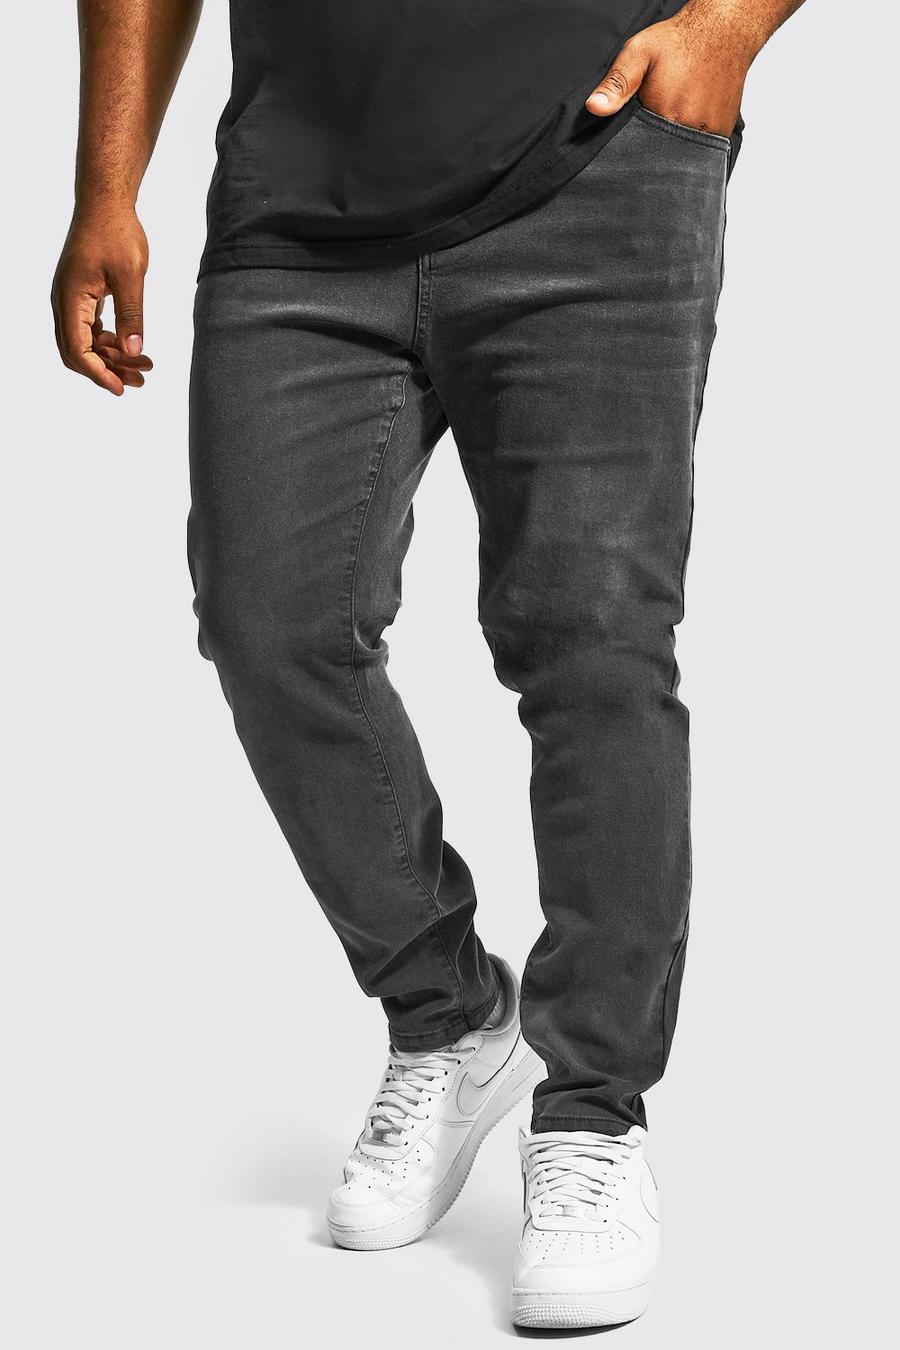 Jeans Plus Size Skinny Fit in Stretch in poliestere riciclato, Charcoal gris